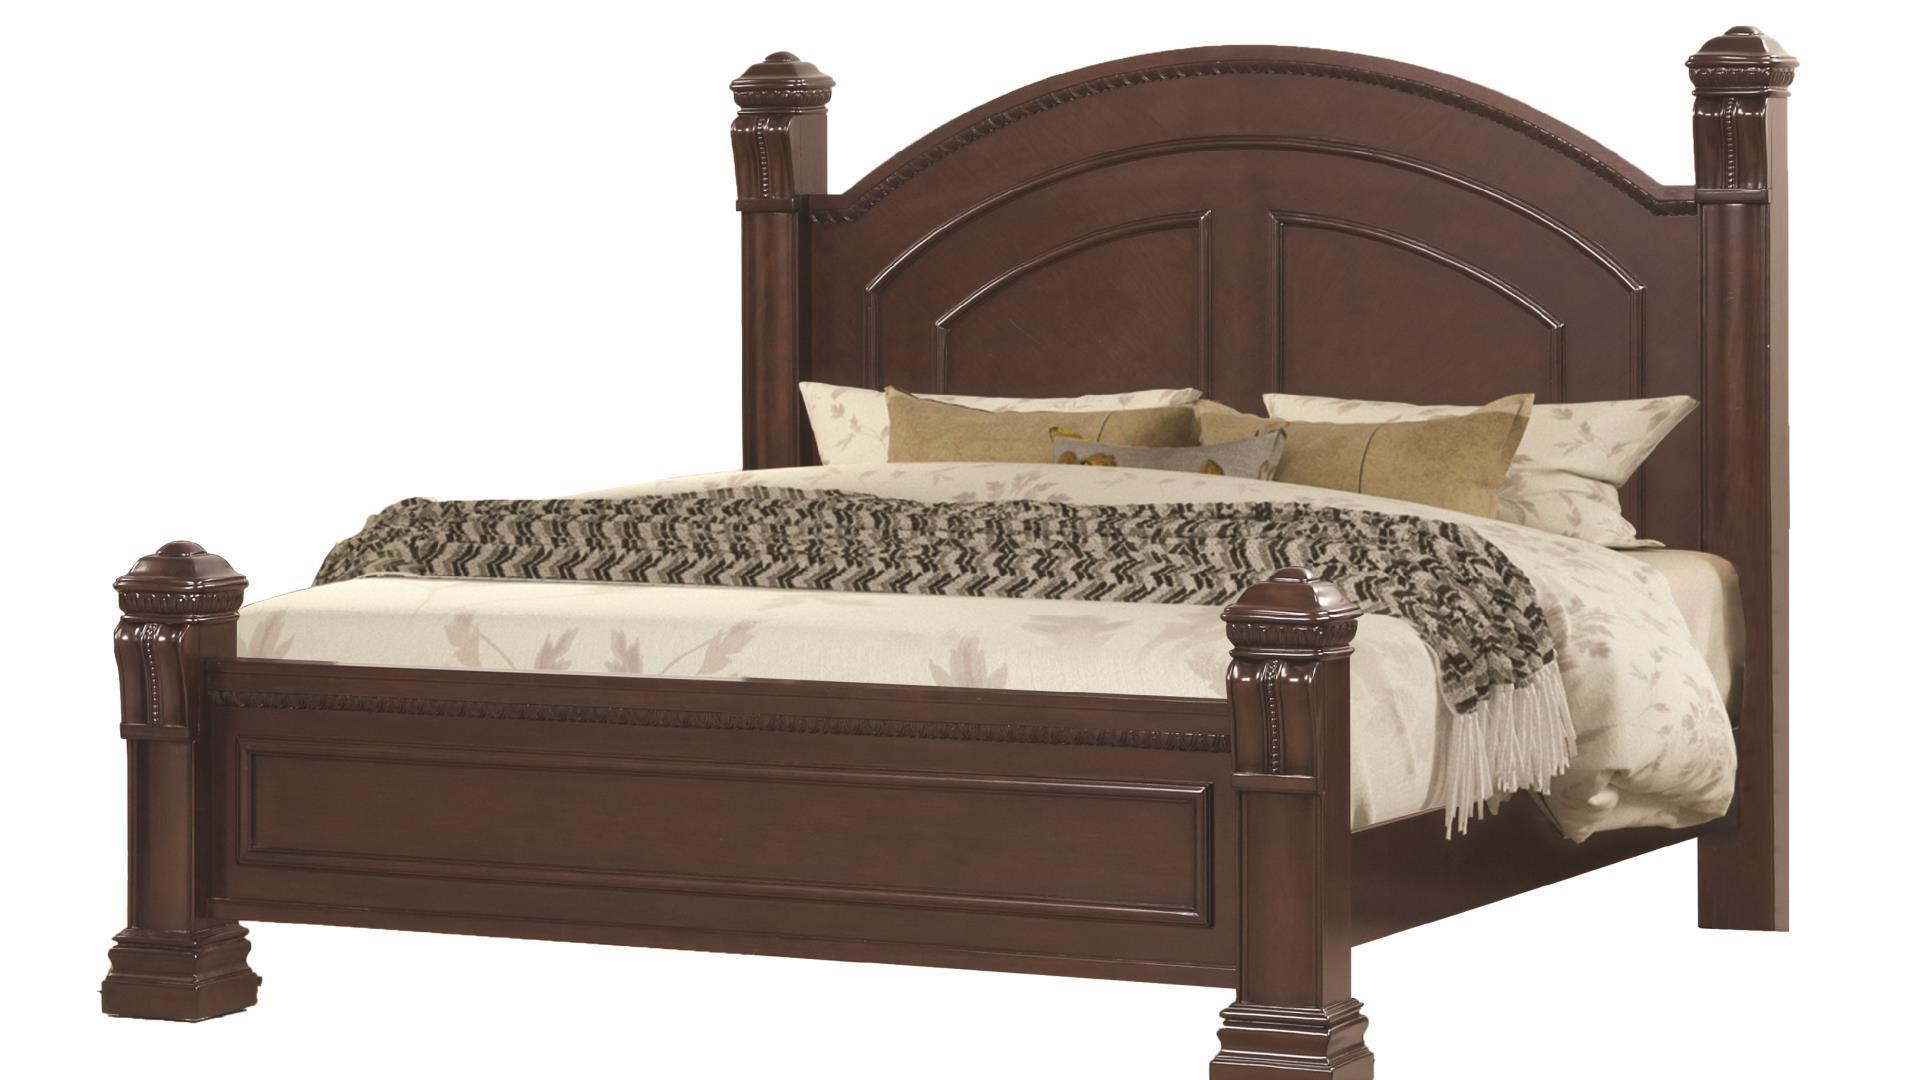 https://nyfurnitureoutlets.com/products/cherry-solid-wood-queen-bedroom-set-5pcs-aspen-galaxy-home-traditional-classic/1x1/576325-2-051996164901.jpg